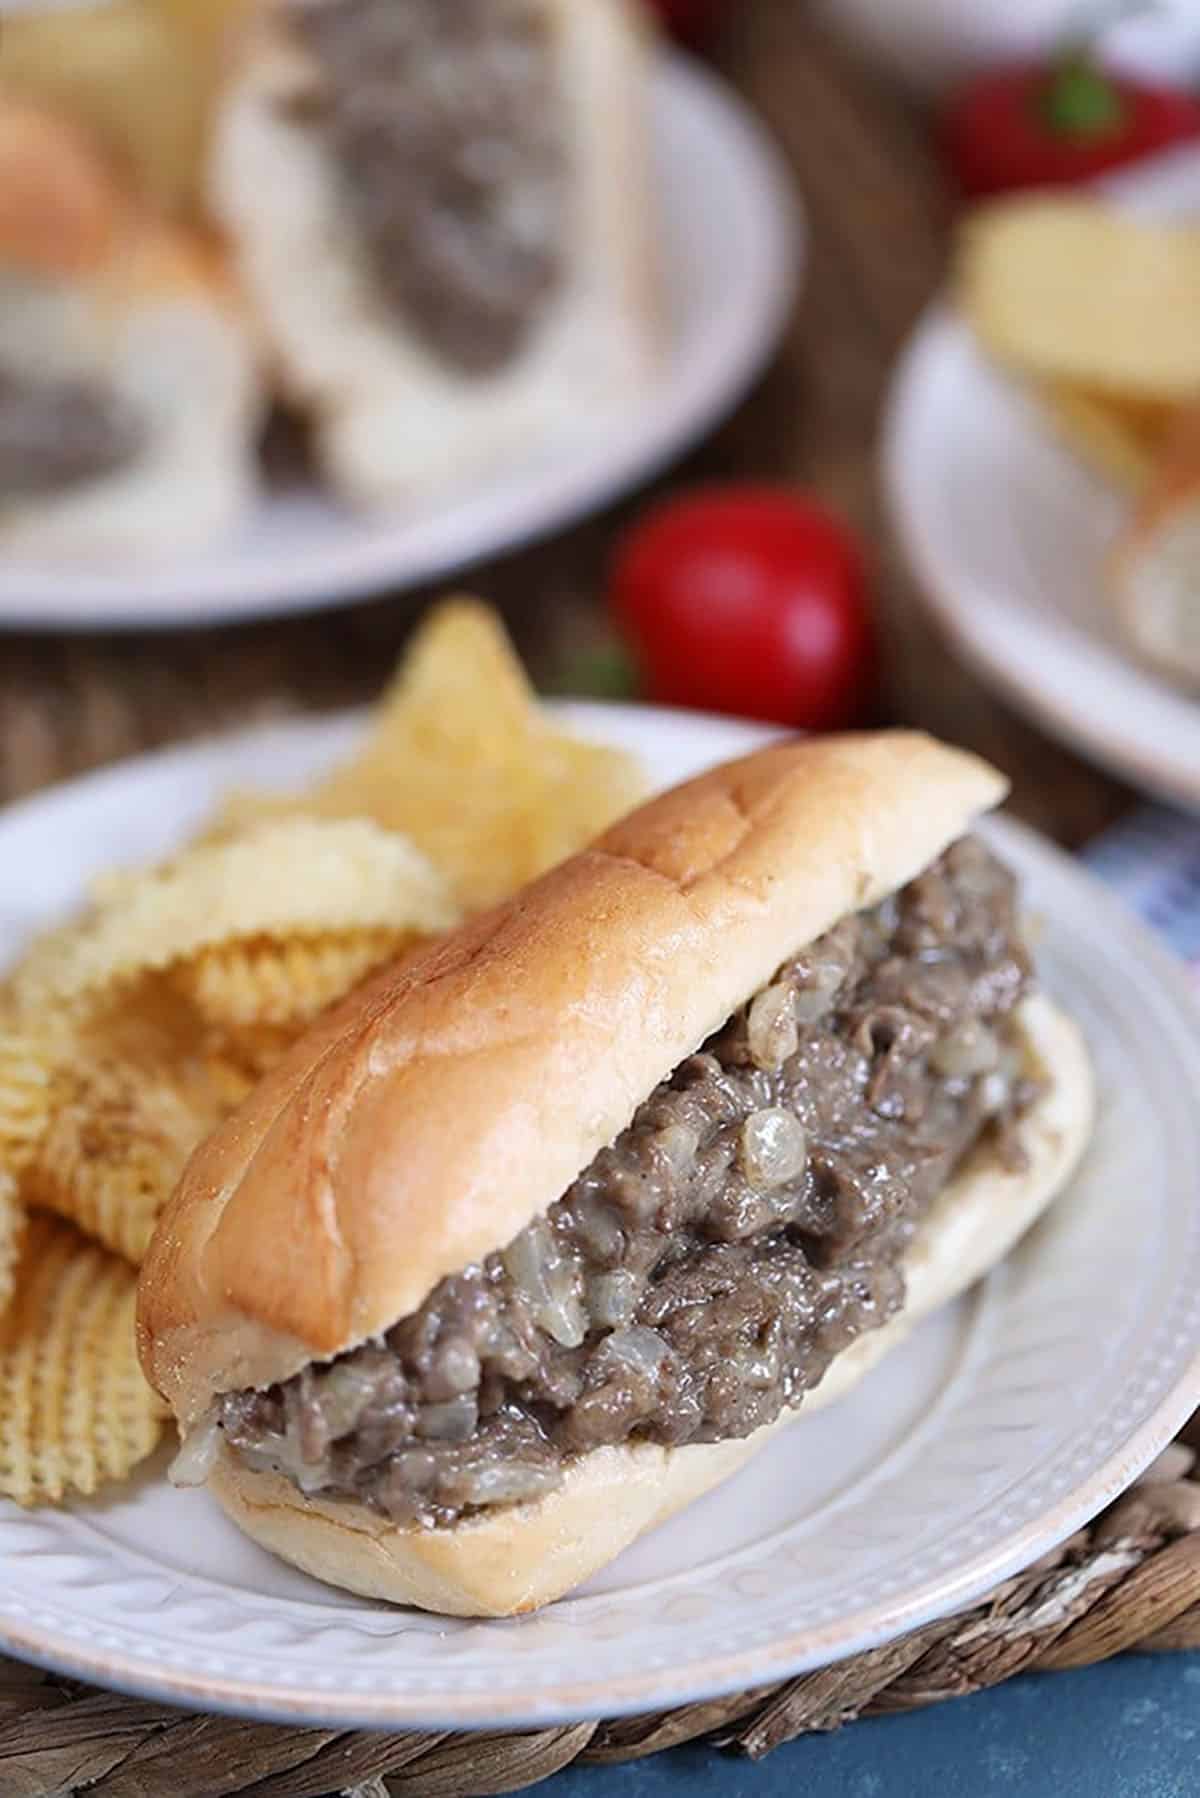 Philly cheesesteak sandwich on a white plate with chips.